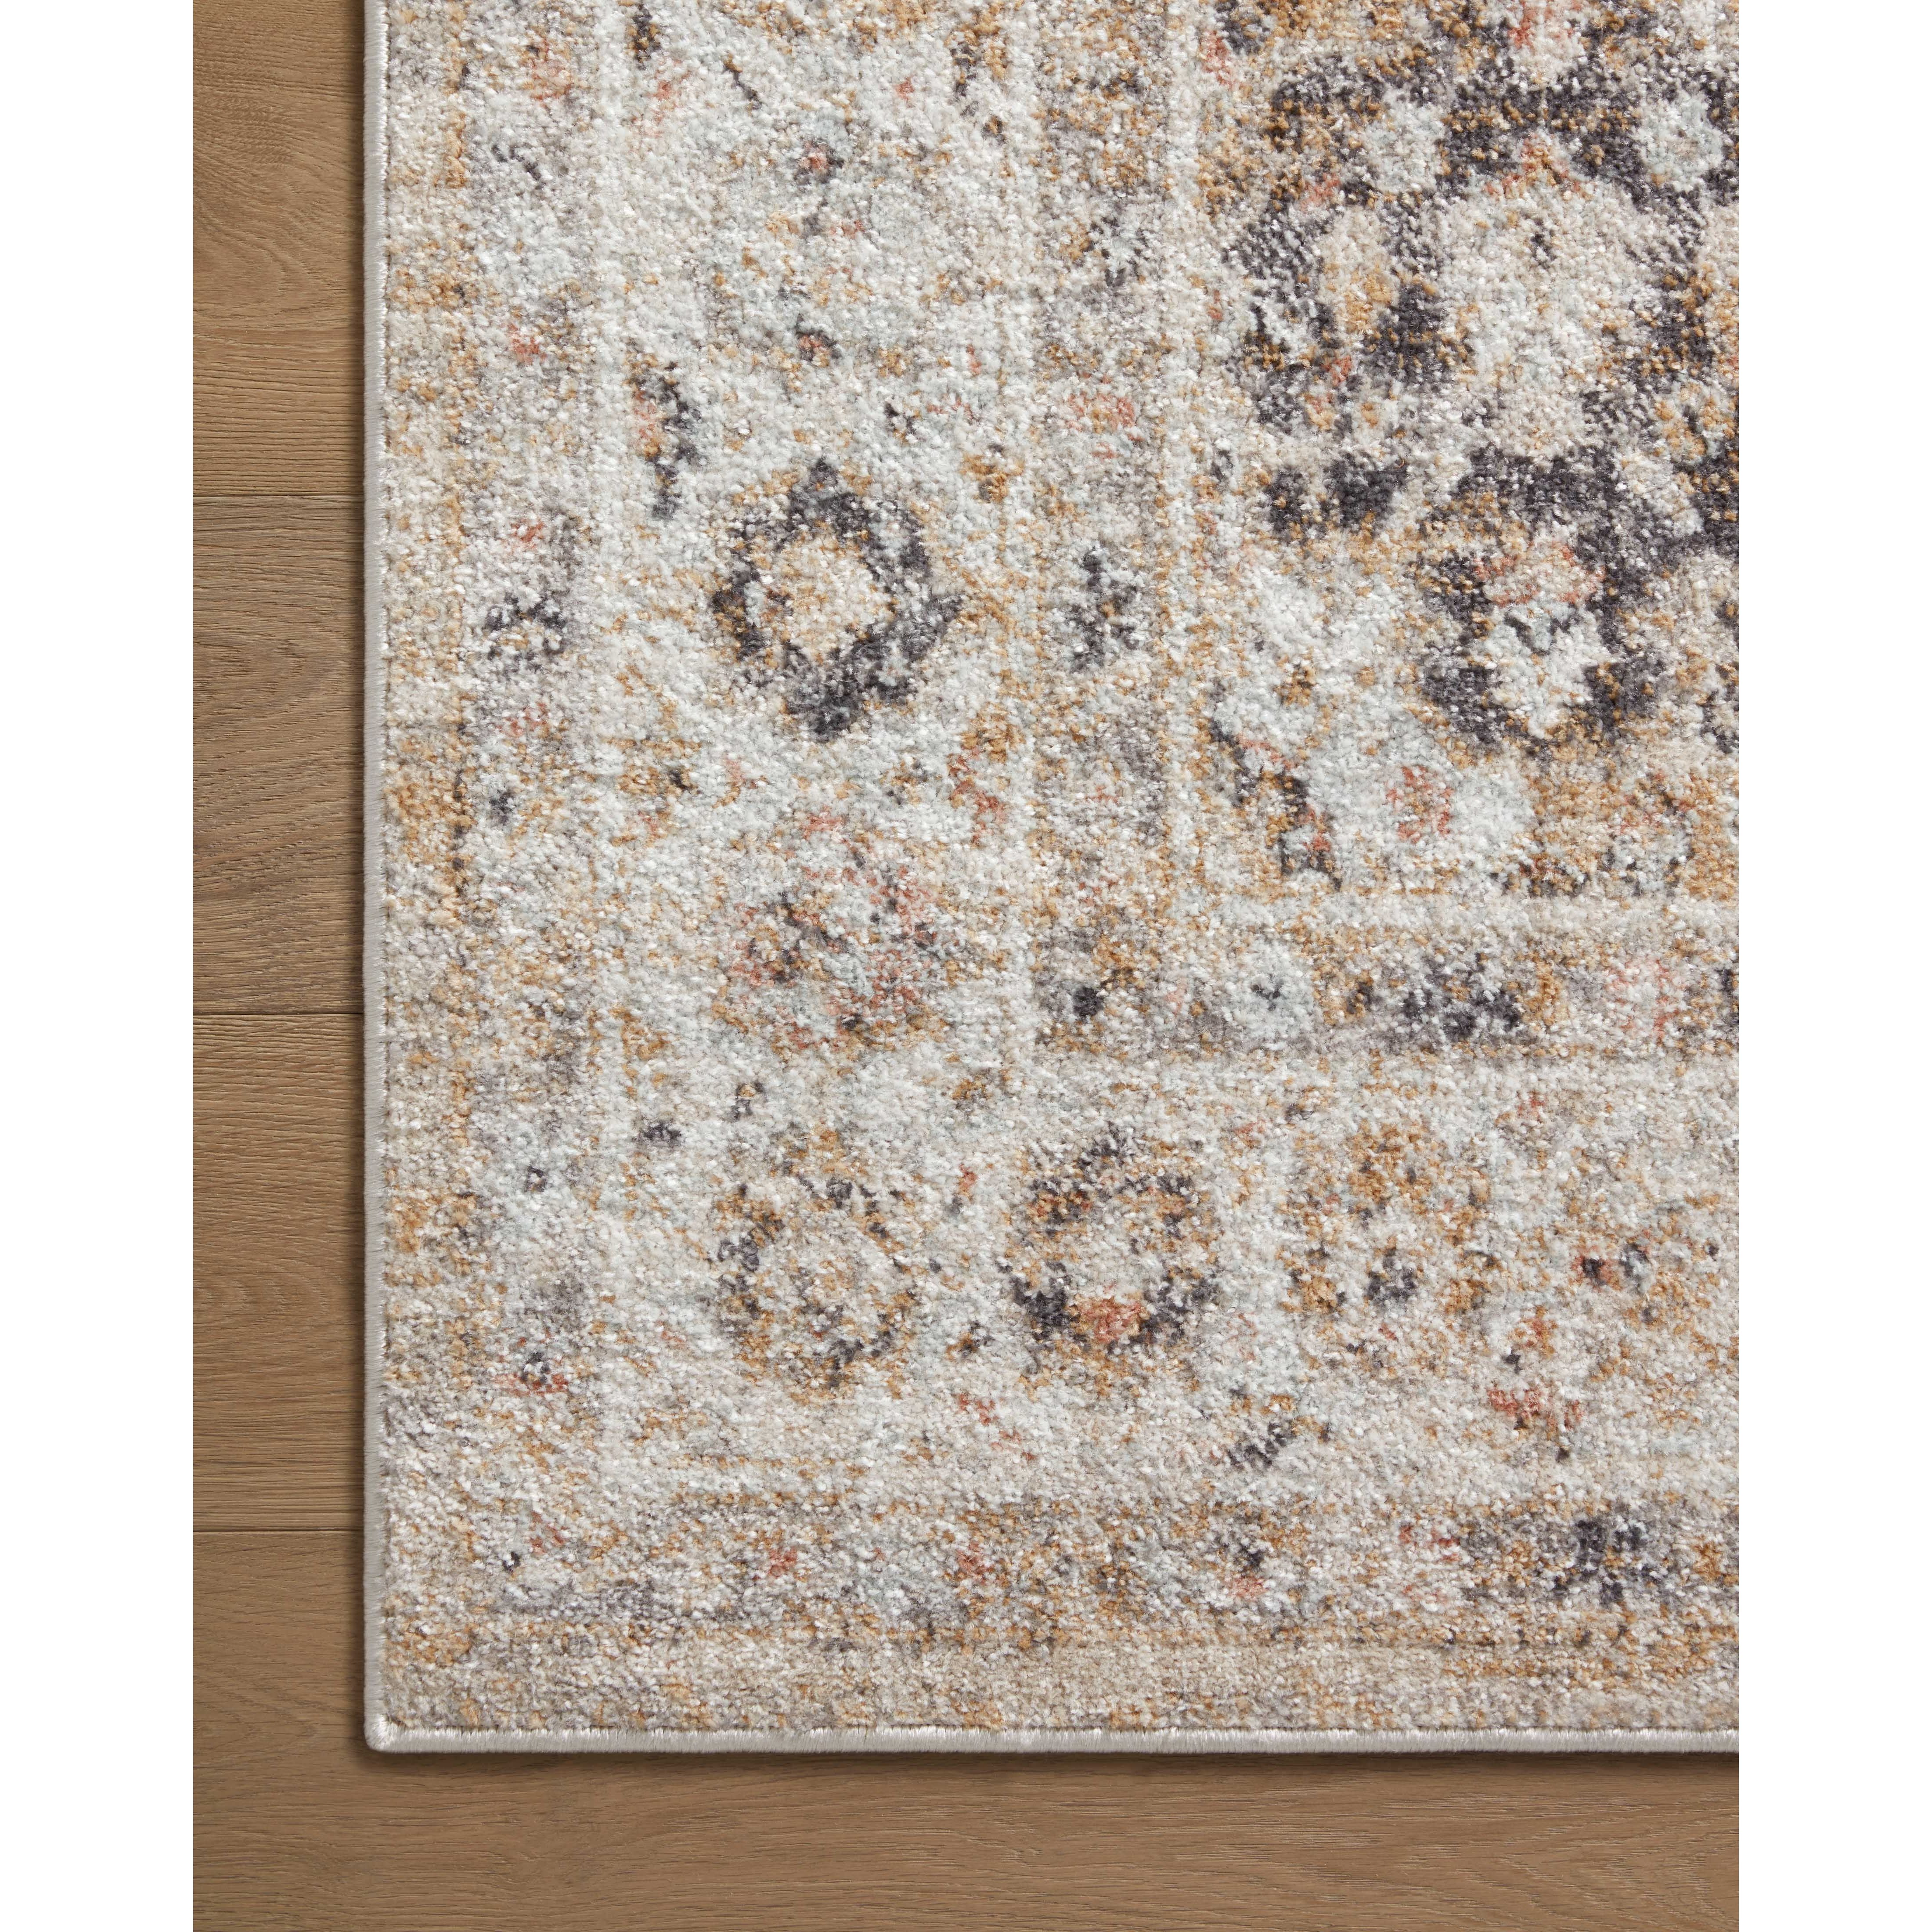 Inspired by antique Turkish Oushak carpets with large-scale motifs, the Monroe Beige / Multi Rug modernizes the traditional design in neutral palettes, many of which have black details that anchor the rug in the room. Monroe is power-loomed of 100% polypropylene for easy care and reliable durability. Amethyst Home provides interior design, new home construction design consulting, vintage area rugs, and lighting in the Salt Lake City metro area.